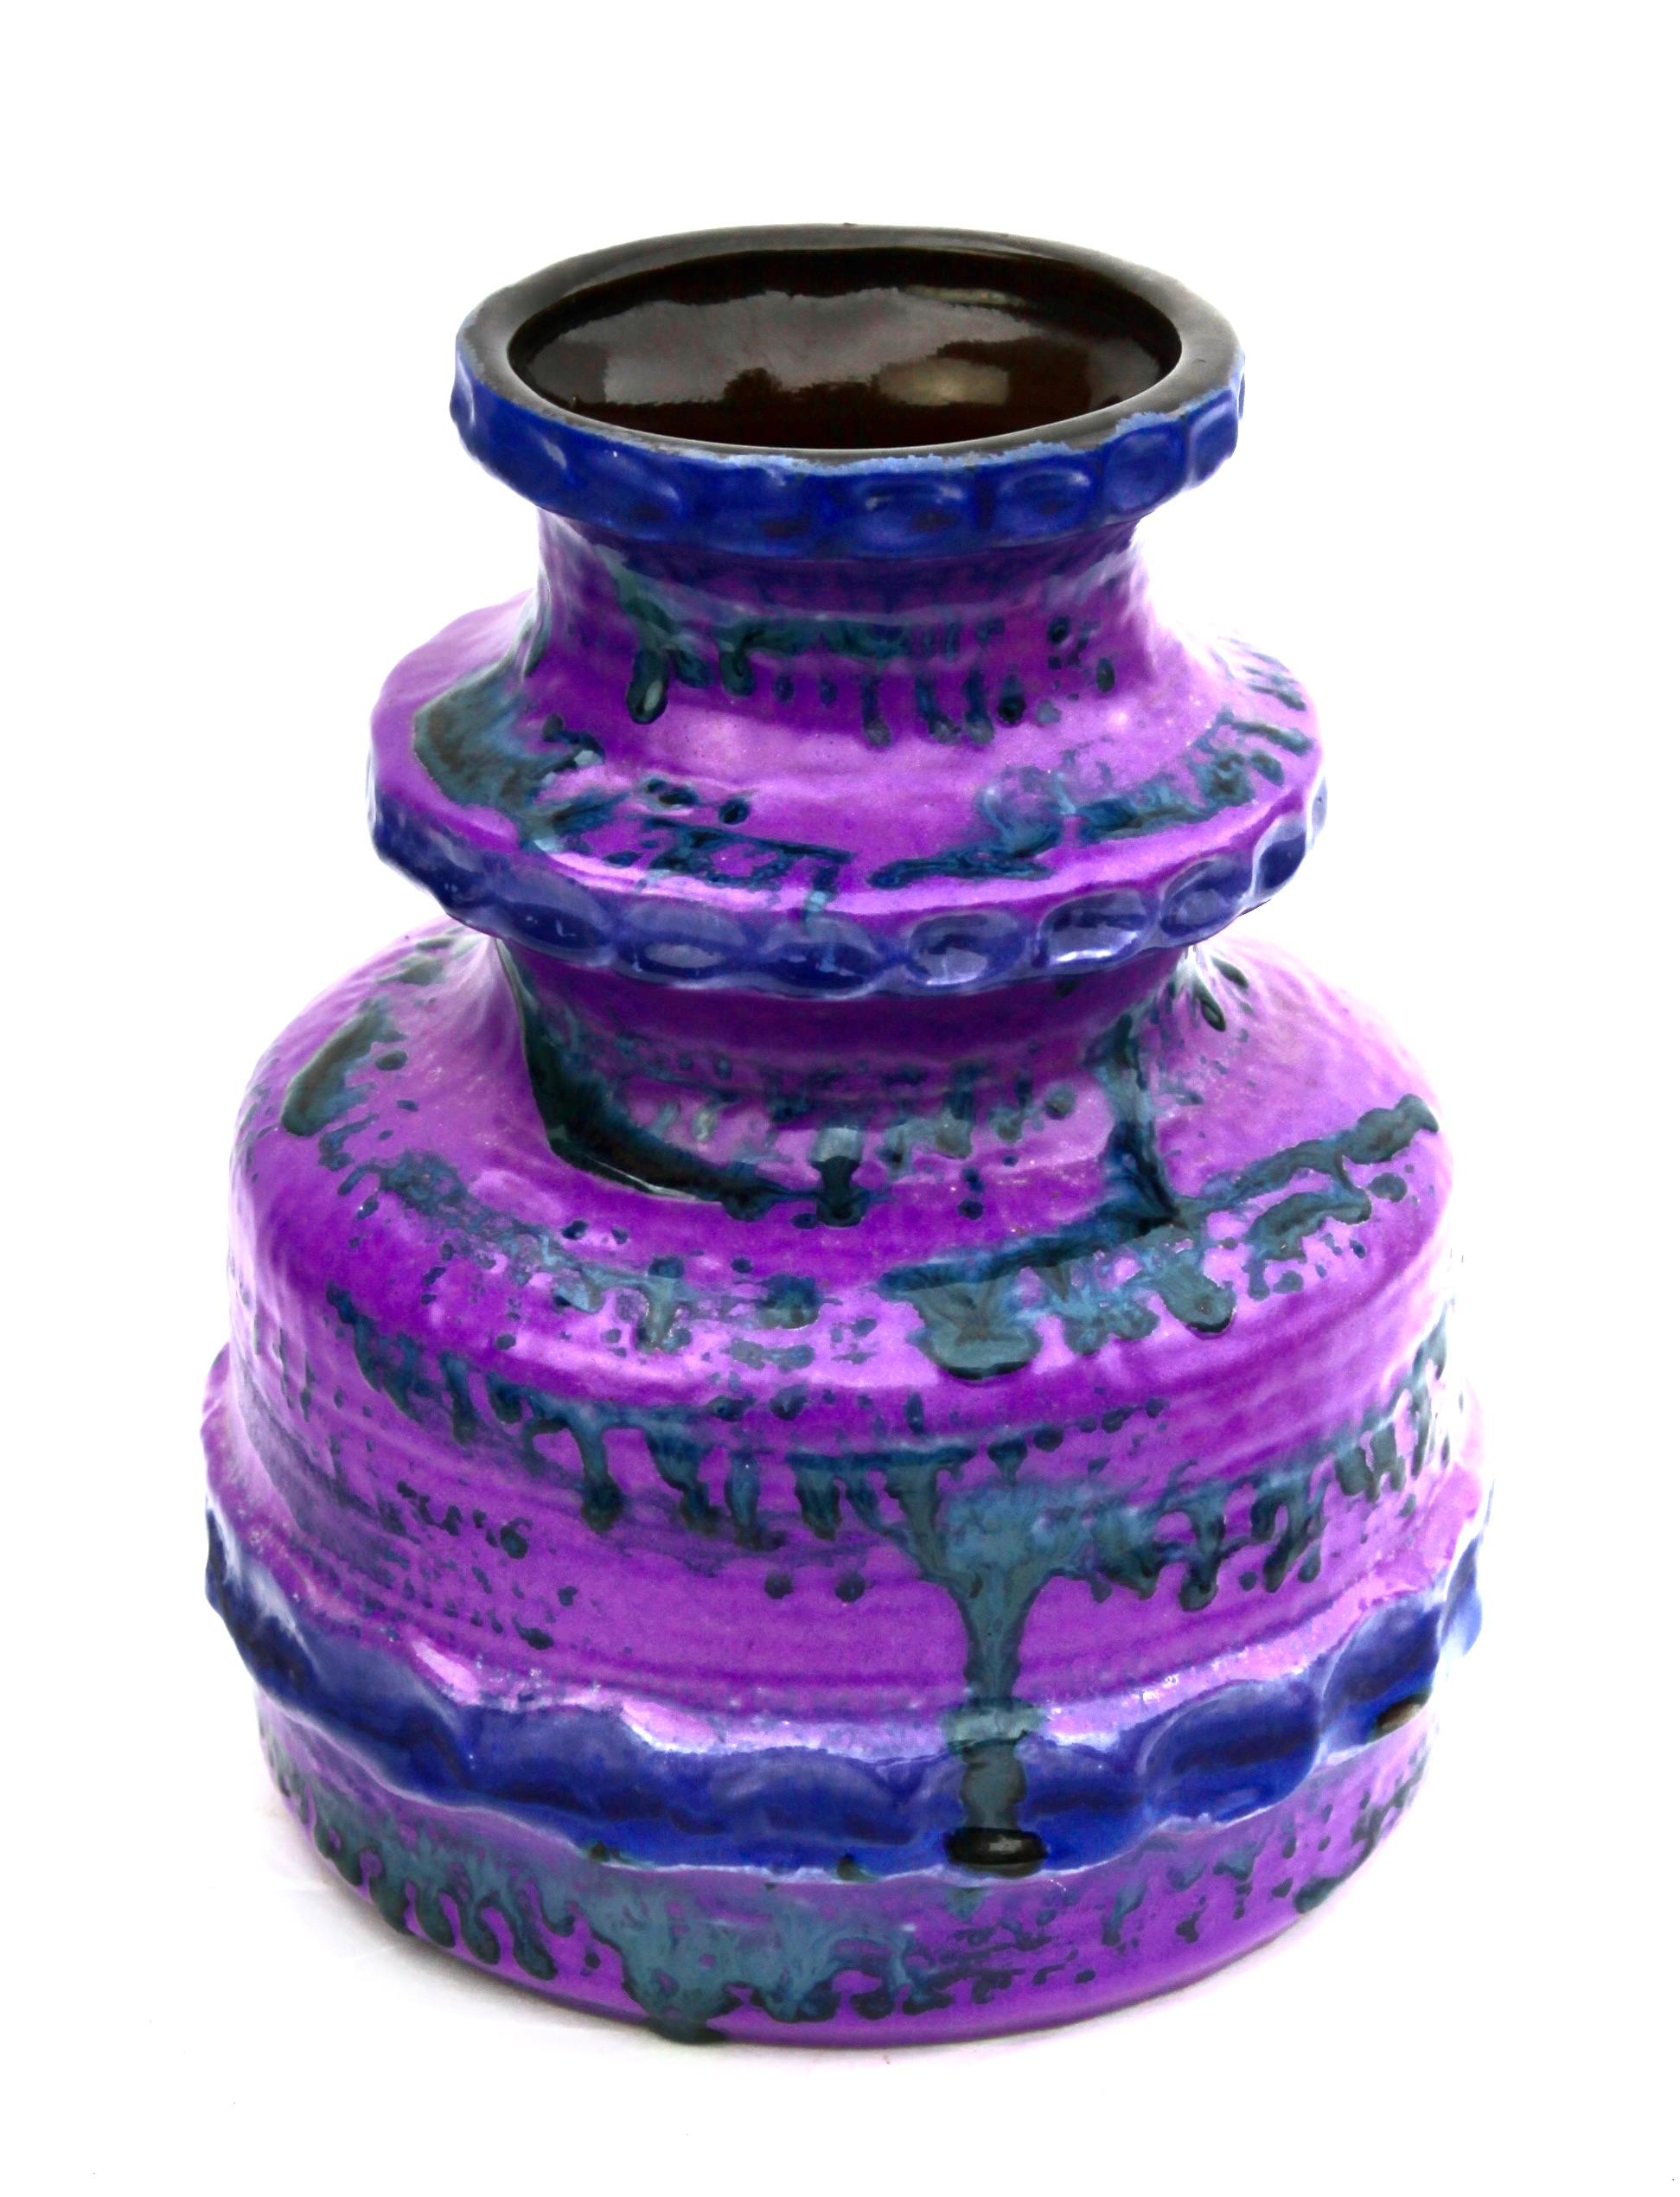 Fat lava vase by Carstens Tonnieshof (W-Germany) 7324-20, 1960-70s.
Hand-painted decor with unusual purple and blue drip-glazes.
Stamped on base. 7324-20 and W-Germany.
21 x 17 cm 1 kg 

The piece is in excellent condition and a real beauty.
 